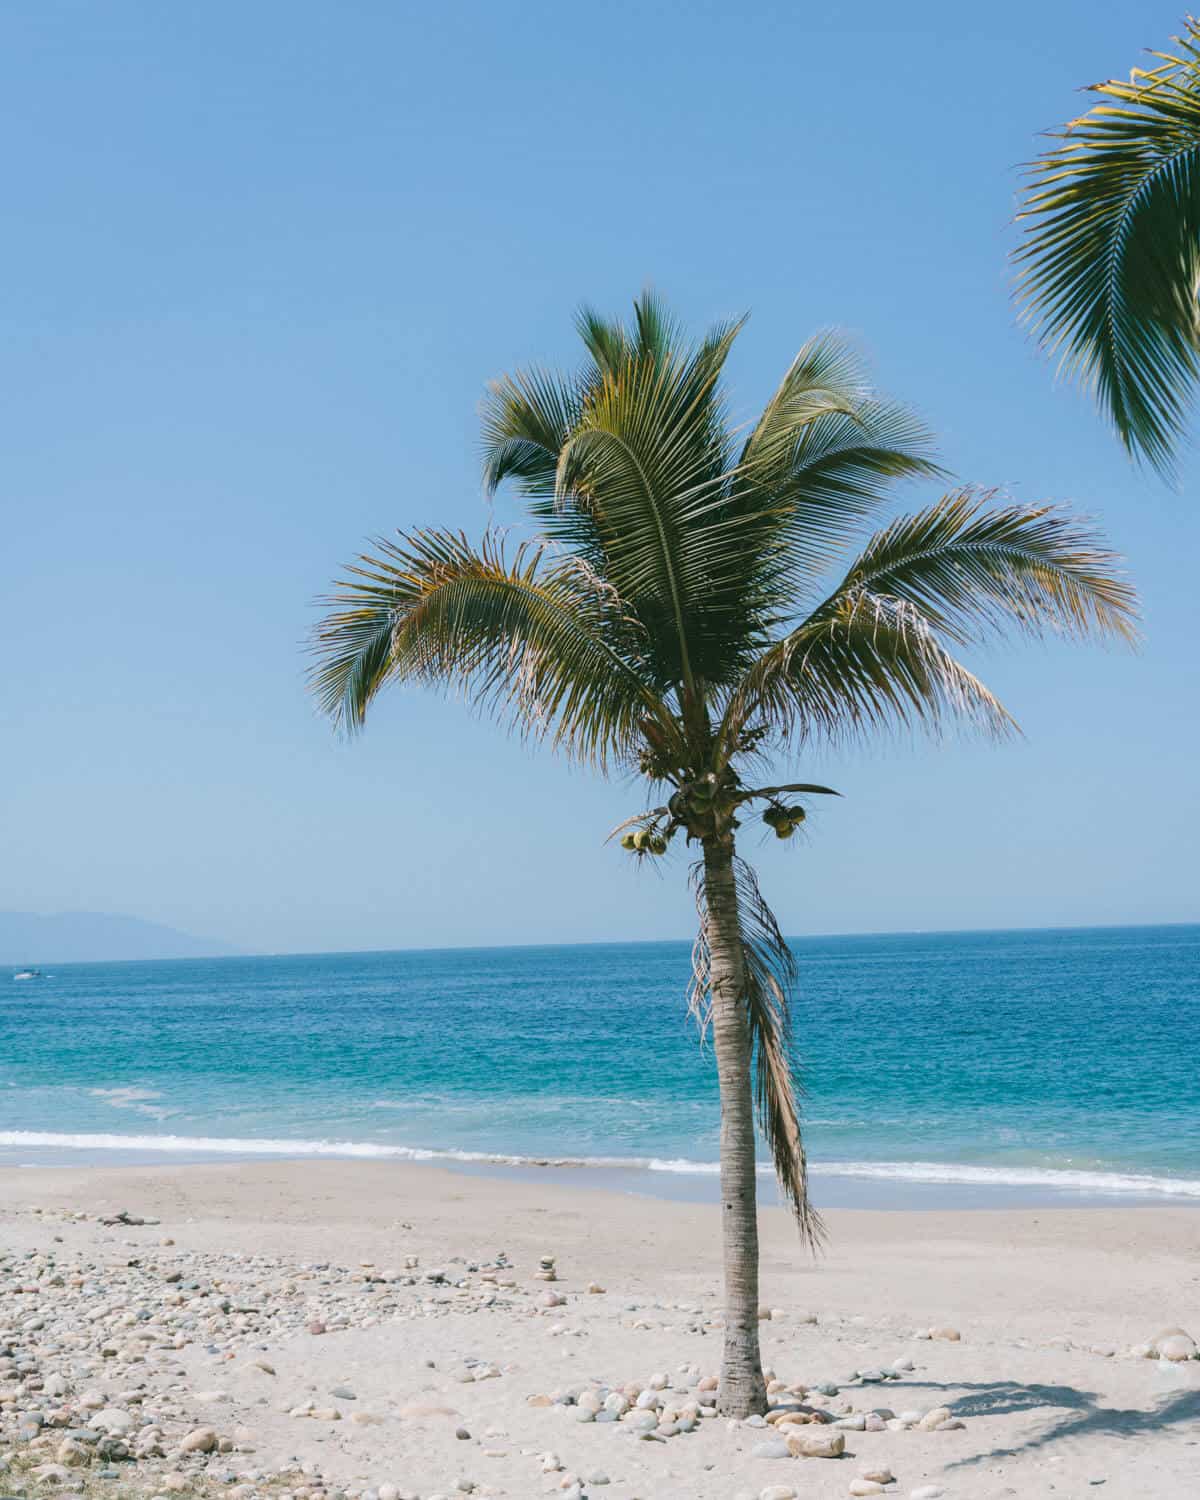 A lone palm tree standing on a sandy beach with bright blue calm waters behind it in Puerto Vallarta